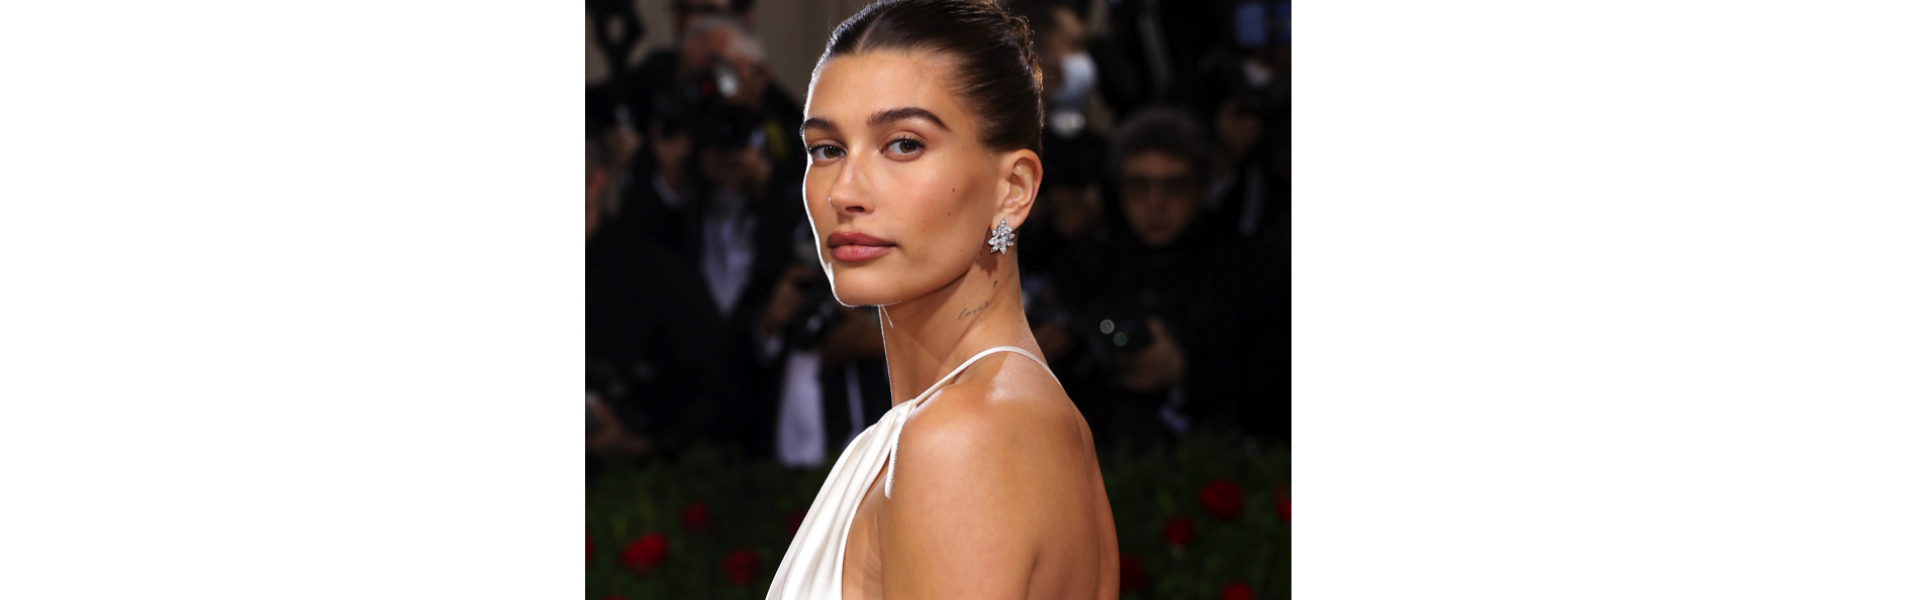 Hailey Bieber wore Tiffany & Co. at this year's Met Gala